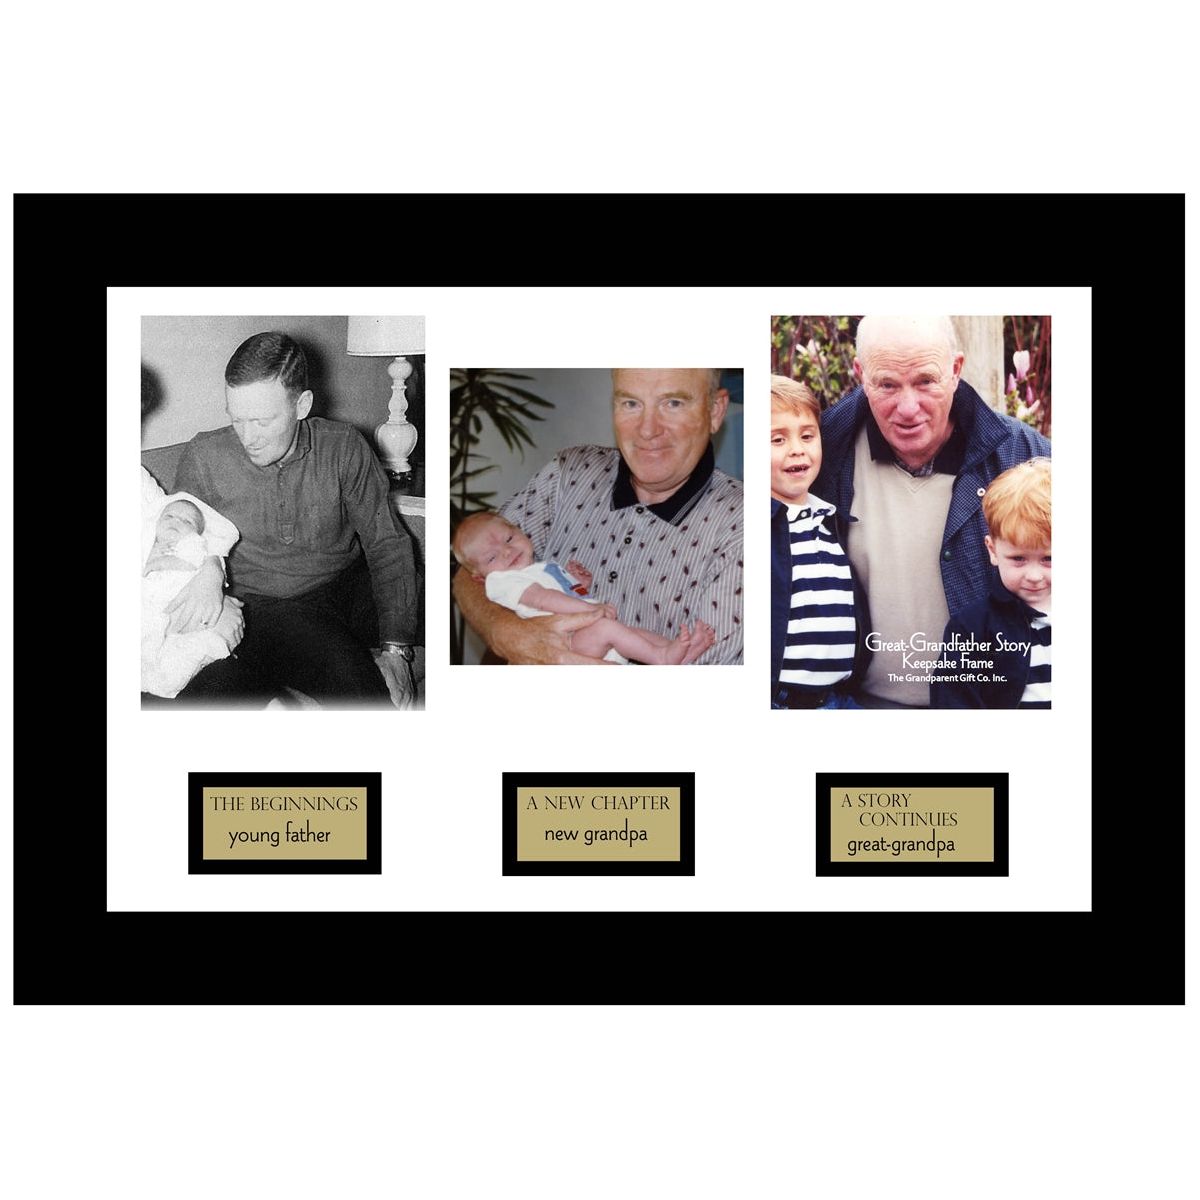 8x12 black frame for wall or table display with 3 spaces and captions for photos for a Great-Grandpa's life story.